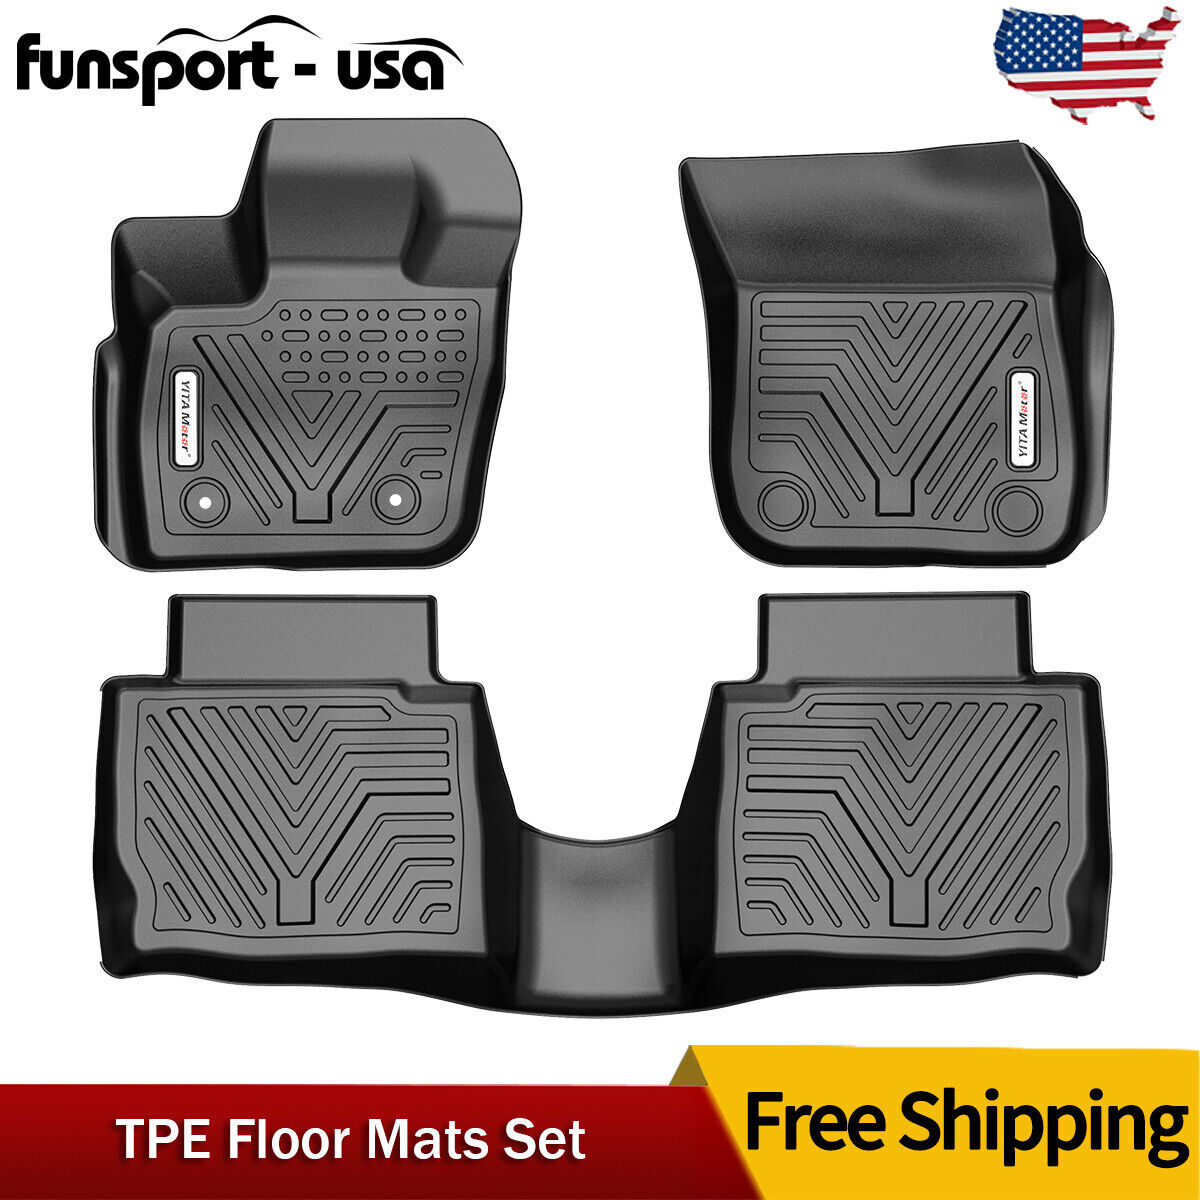 3PCs Floor Mats for 2017-2020 Ford Fusion Waterproof All Season TPE Rubber Liner